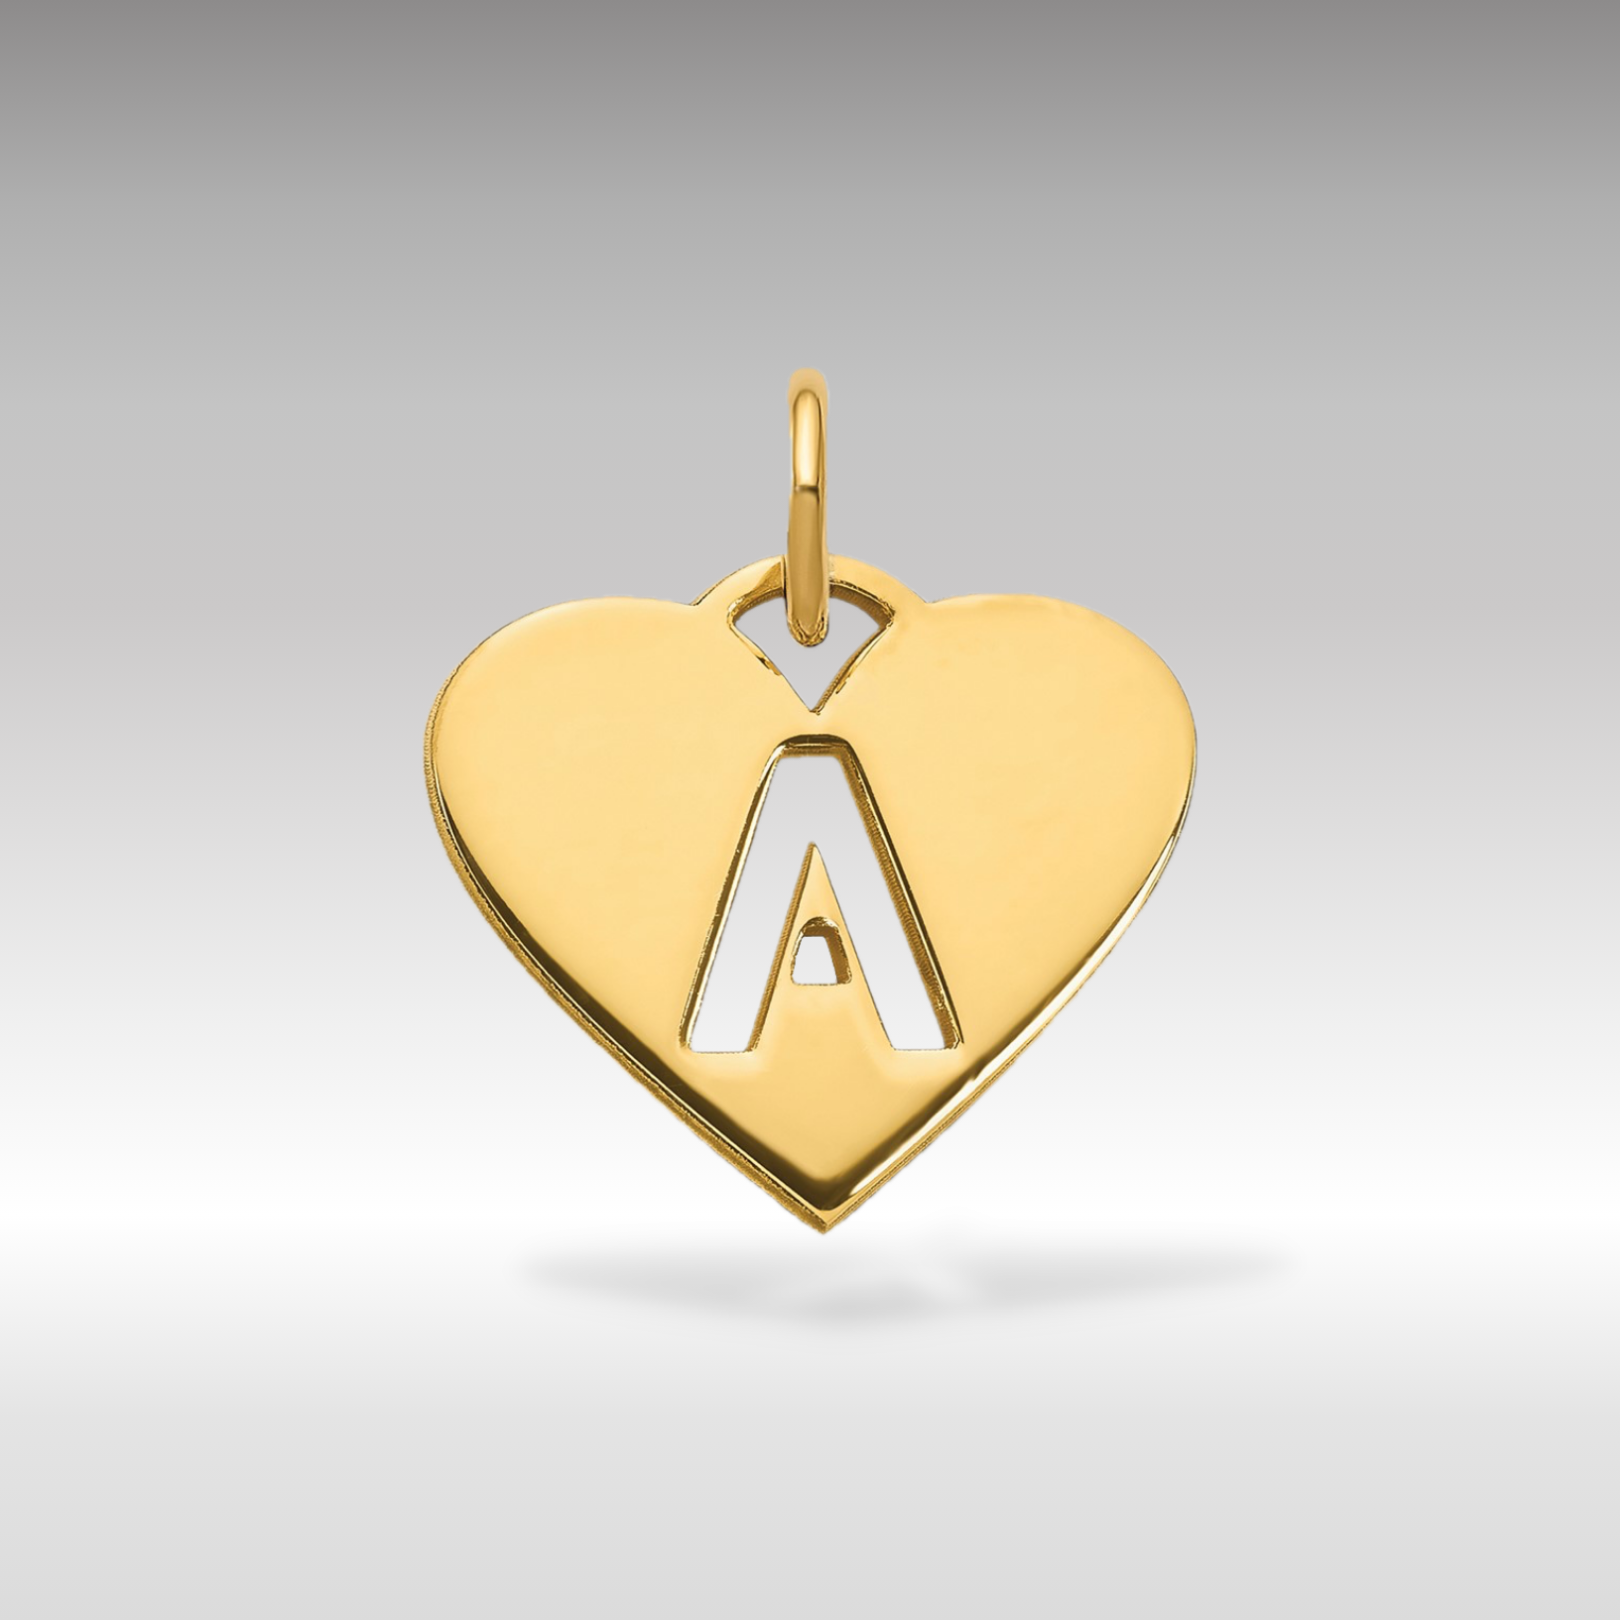 14K Gold Heart Pendant with Letter 'A' - Charlie & Co. Jewelry